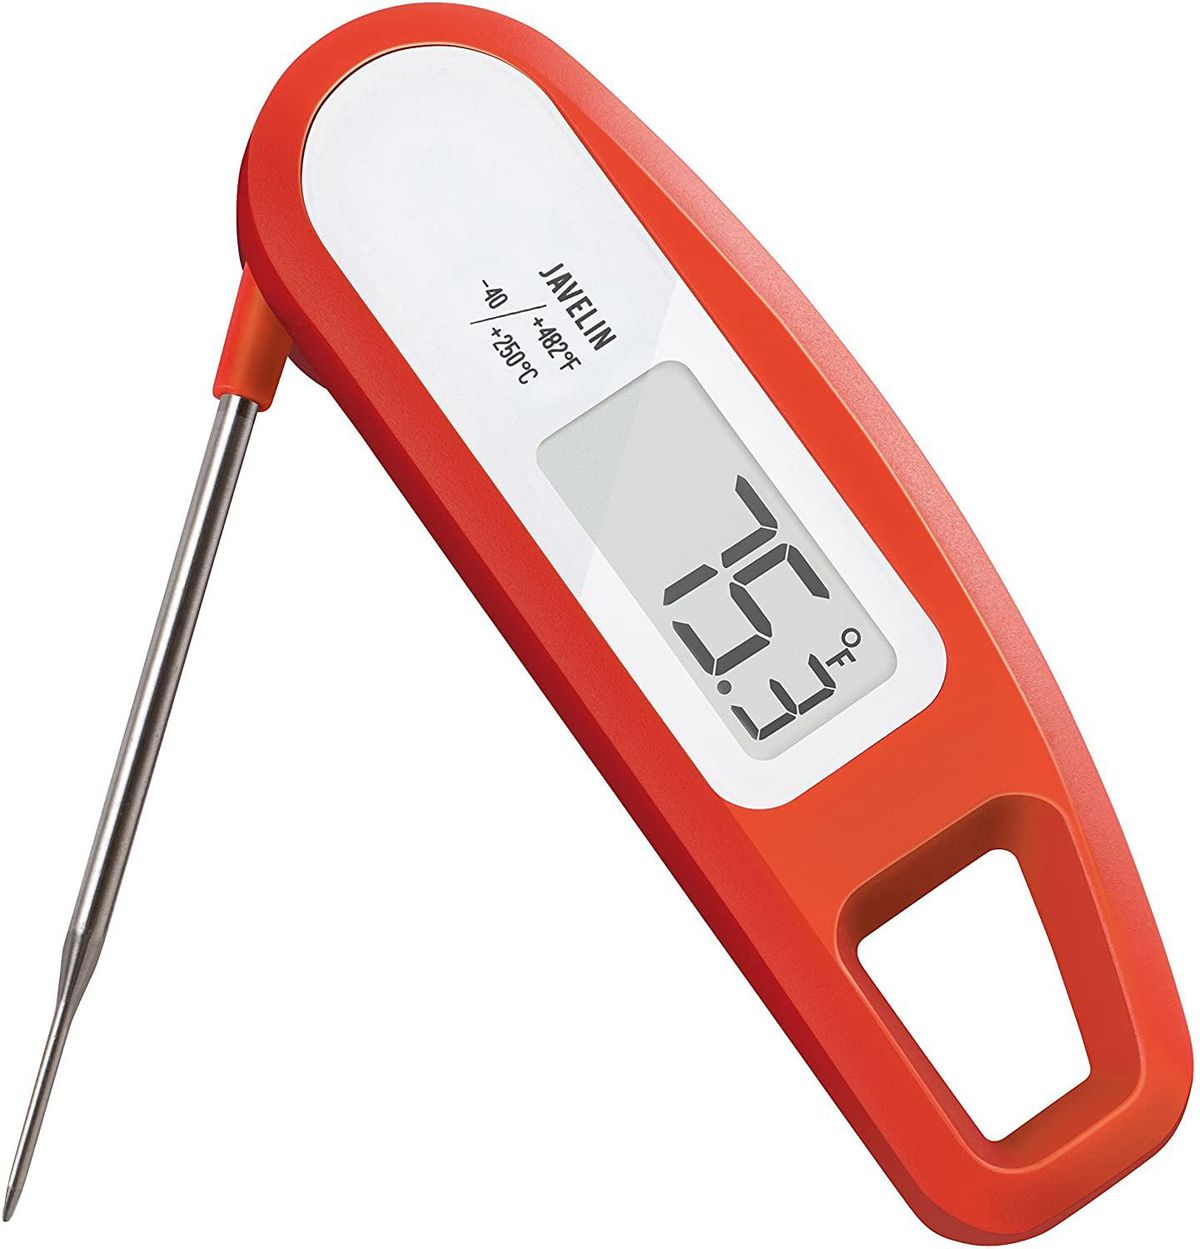 Javelin Digital Meat Thermometer